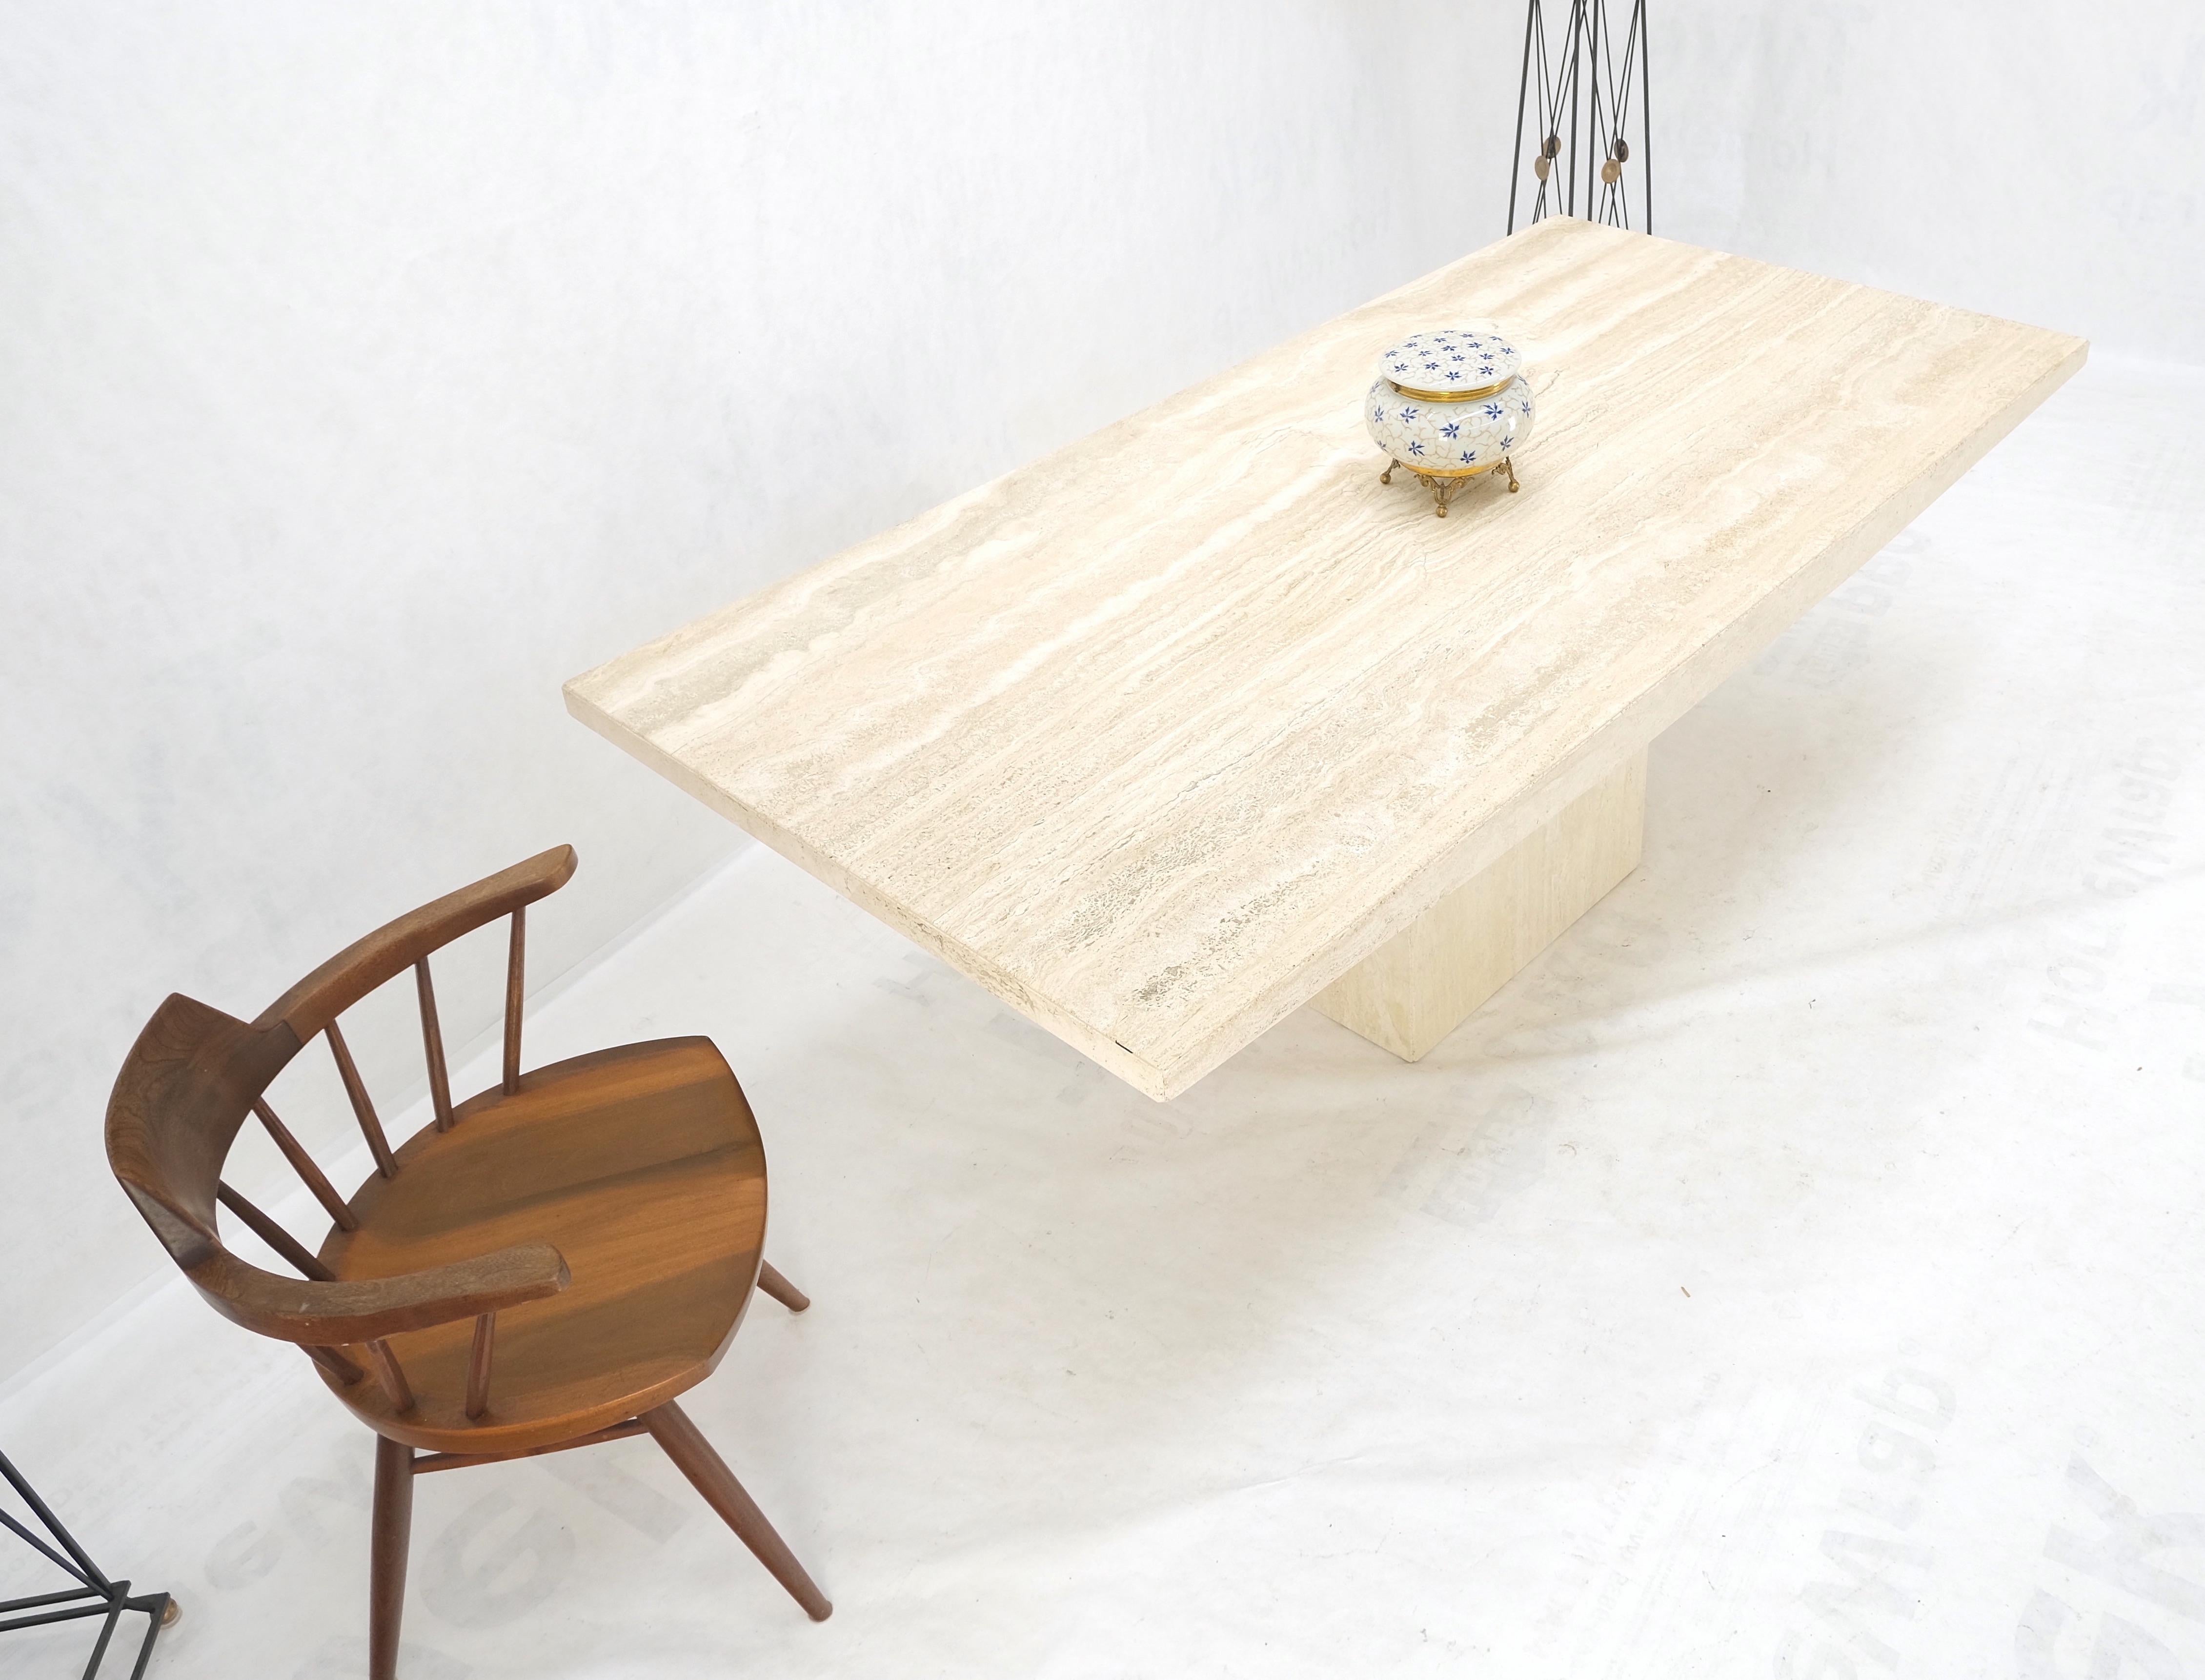 Midcentury Italian Modern Travertine Single Pedestal Dining Conference Table In Good Condition For Sale In Rockaway, NJ